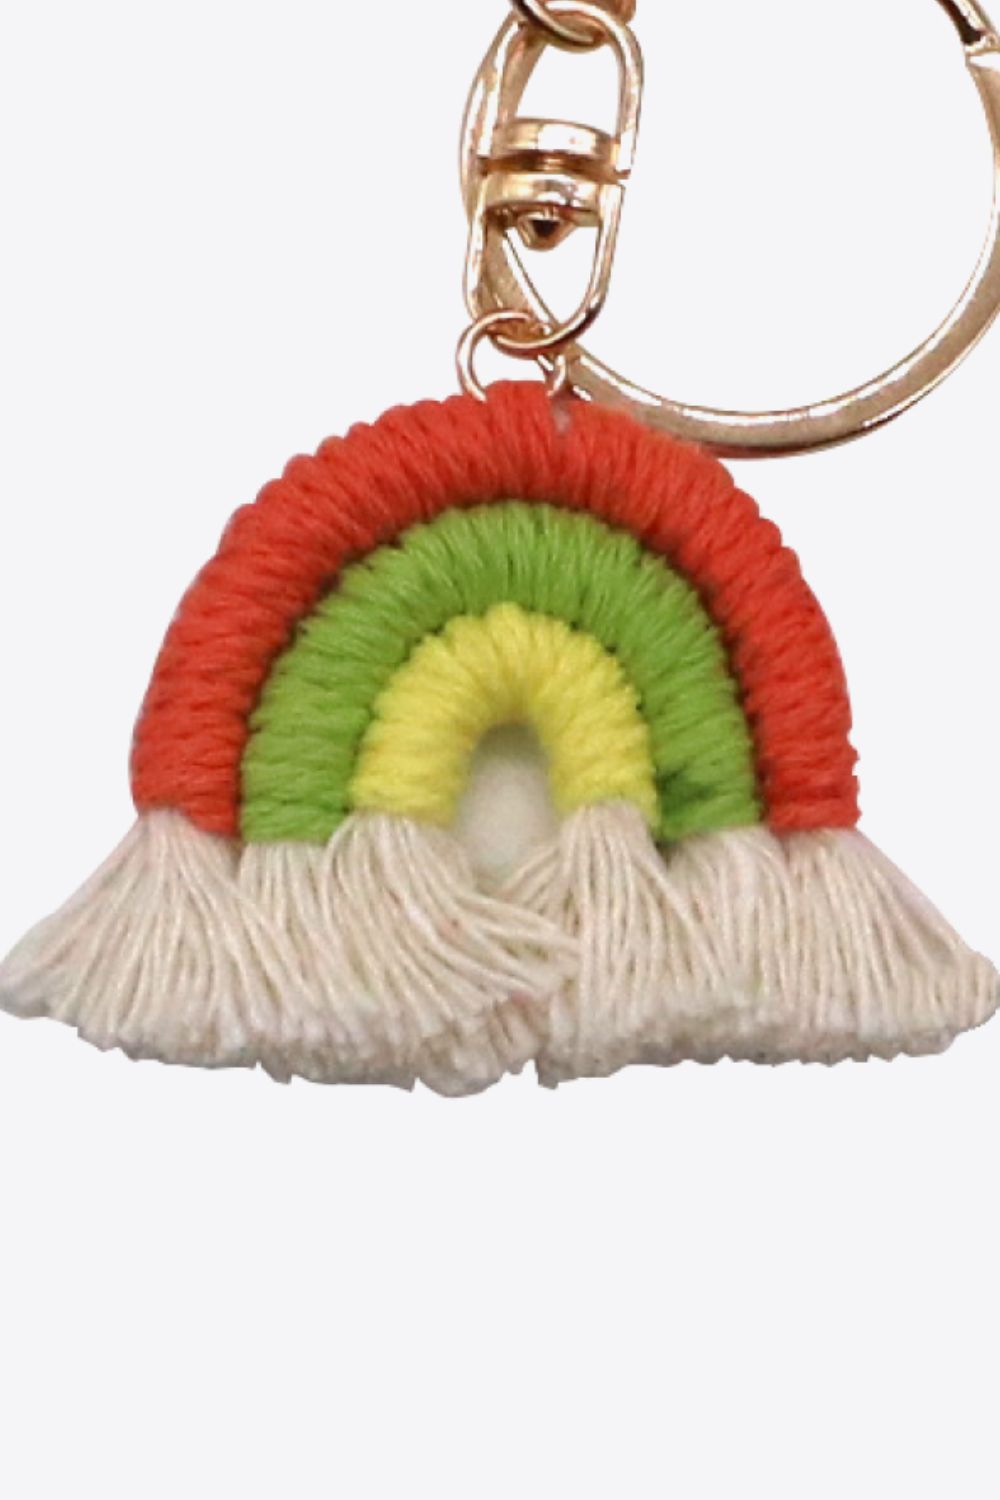 Assorted 4-Pack Rainbow Fringe Keychain free shipping -Oh Em Gee Boutique